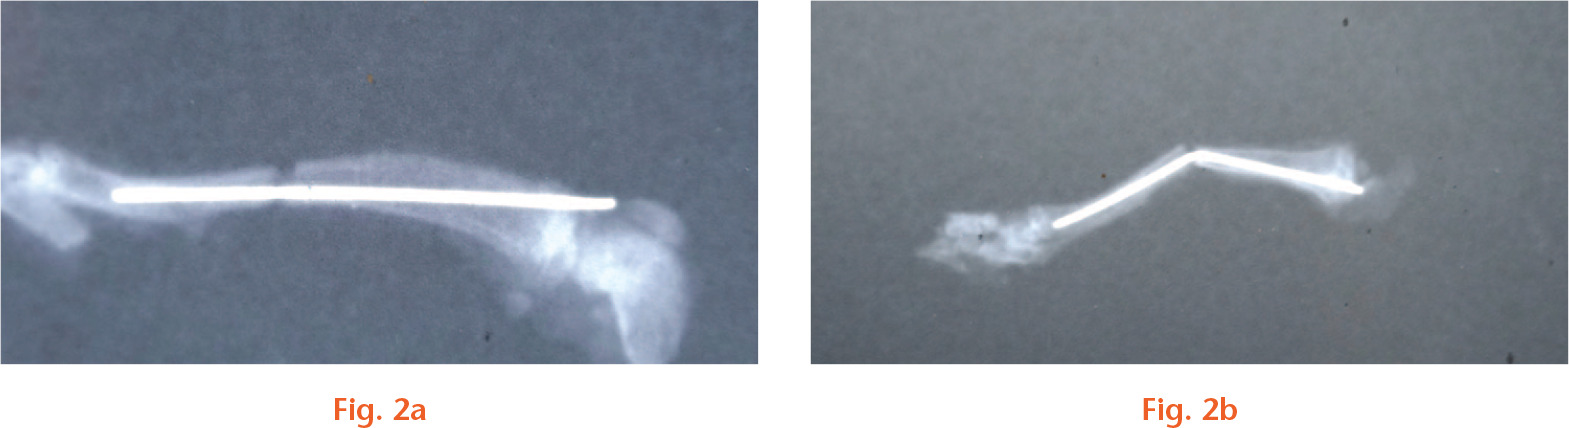 Fig. 2 
            Identification of mice models of femoral fracture by x-ray scanning. a) Radiograph of the right femur of normal mice; b) radiograph of the right femur of model mice.
          